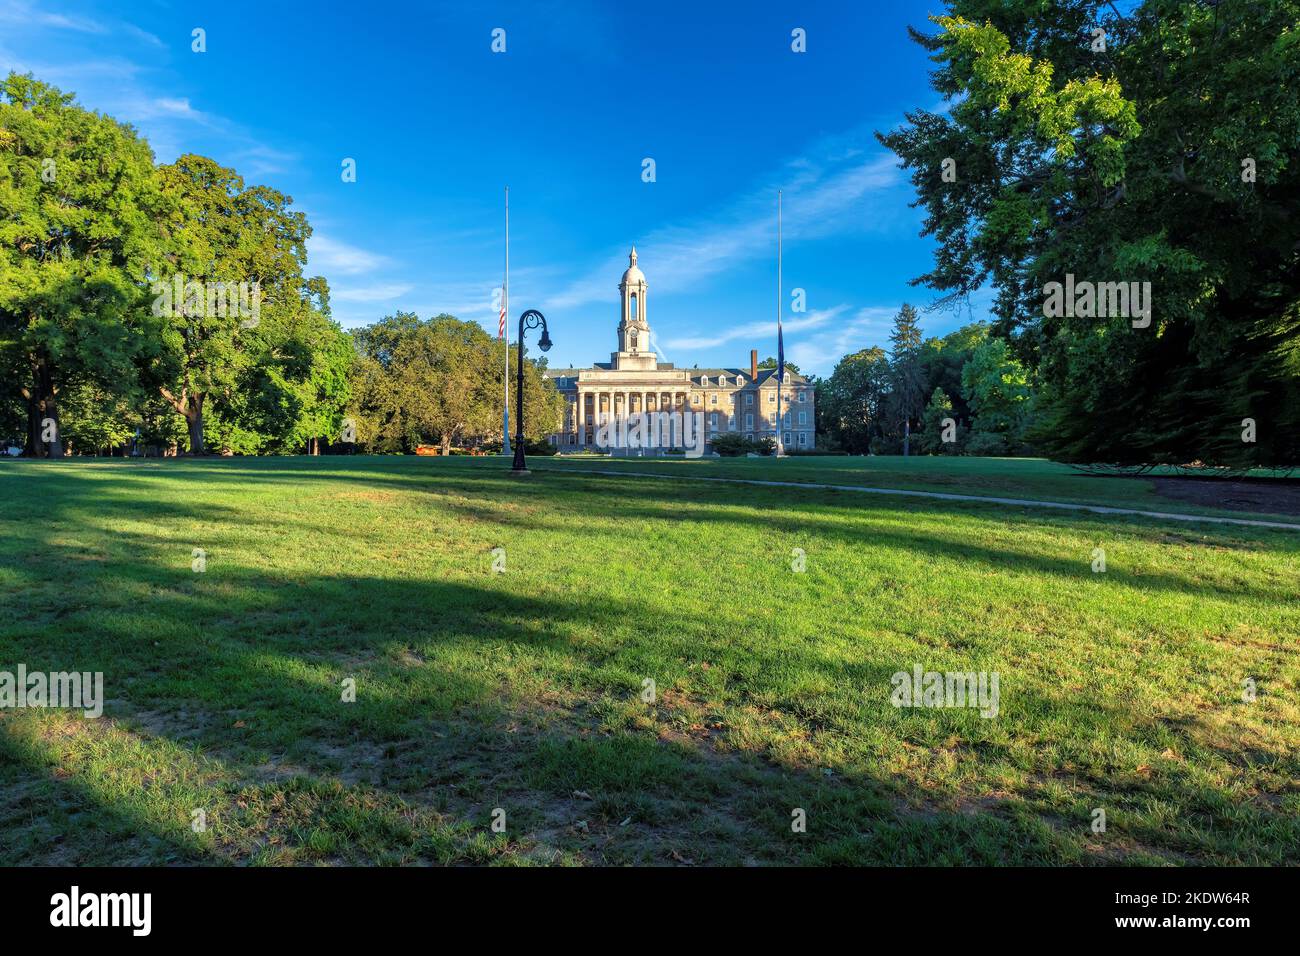 The Old Main building at Sunrise on the campus of Penn State University in State College, Pennsylvania. Stock Photo